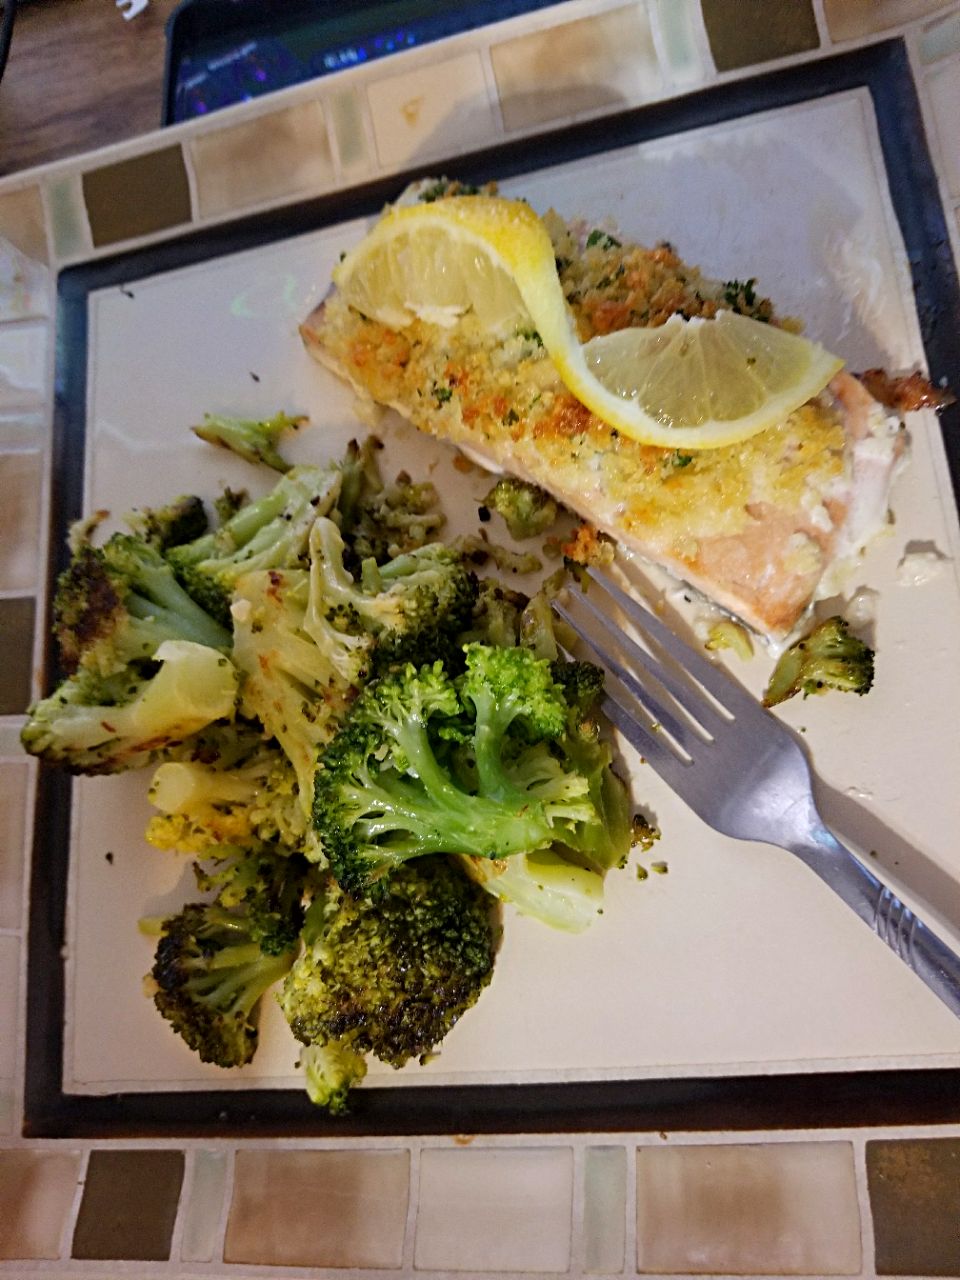 Parmesean Crusted Salmon with Broccoli